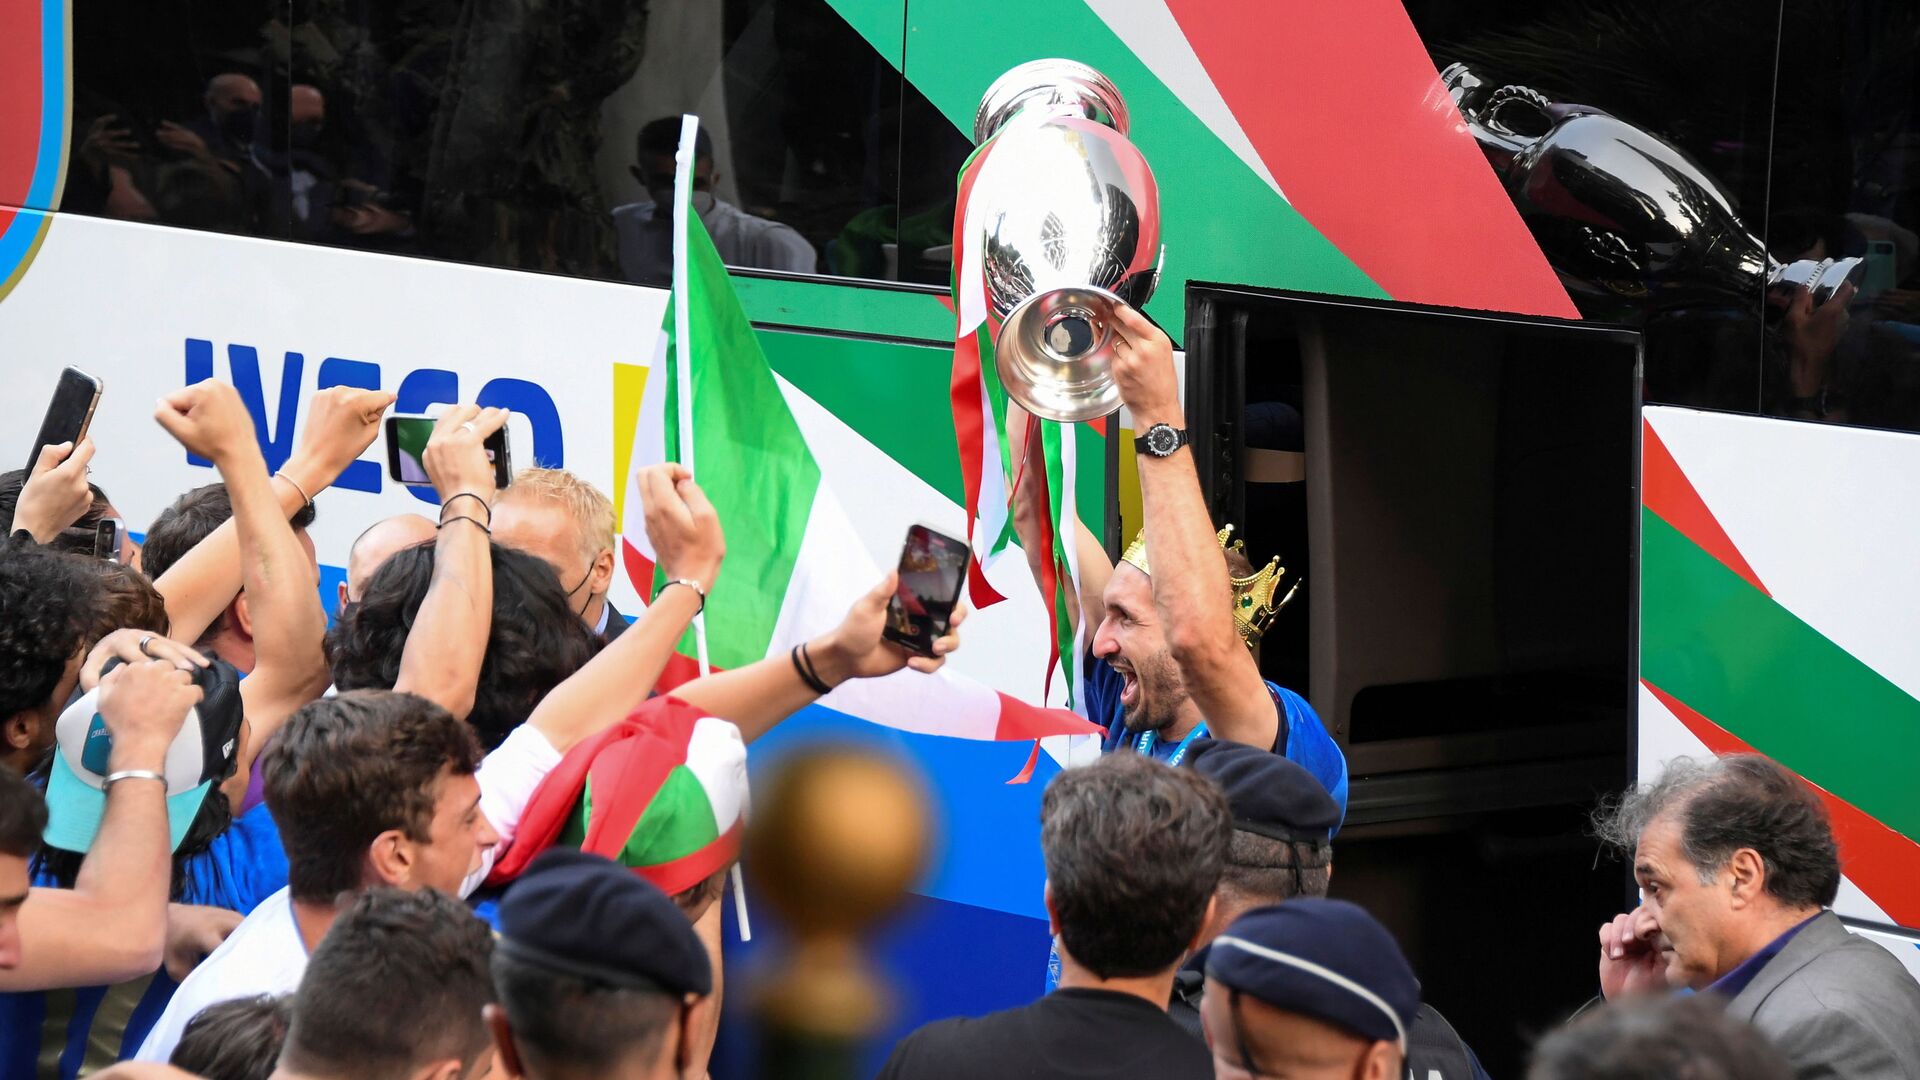 Soccer Football - Euro 2020 -  Rome, Italy - July 12, 2021 - Italy's Giorgio Chiellini exits the bus holding the Euro 2020 cup as the team arrives at the Parco dei Principi hotel after winning the European Championship - اسپوتنیک افغانستان  , 1920, 15.12.2021